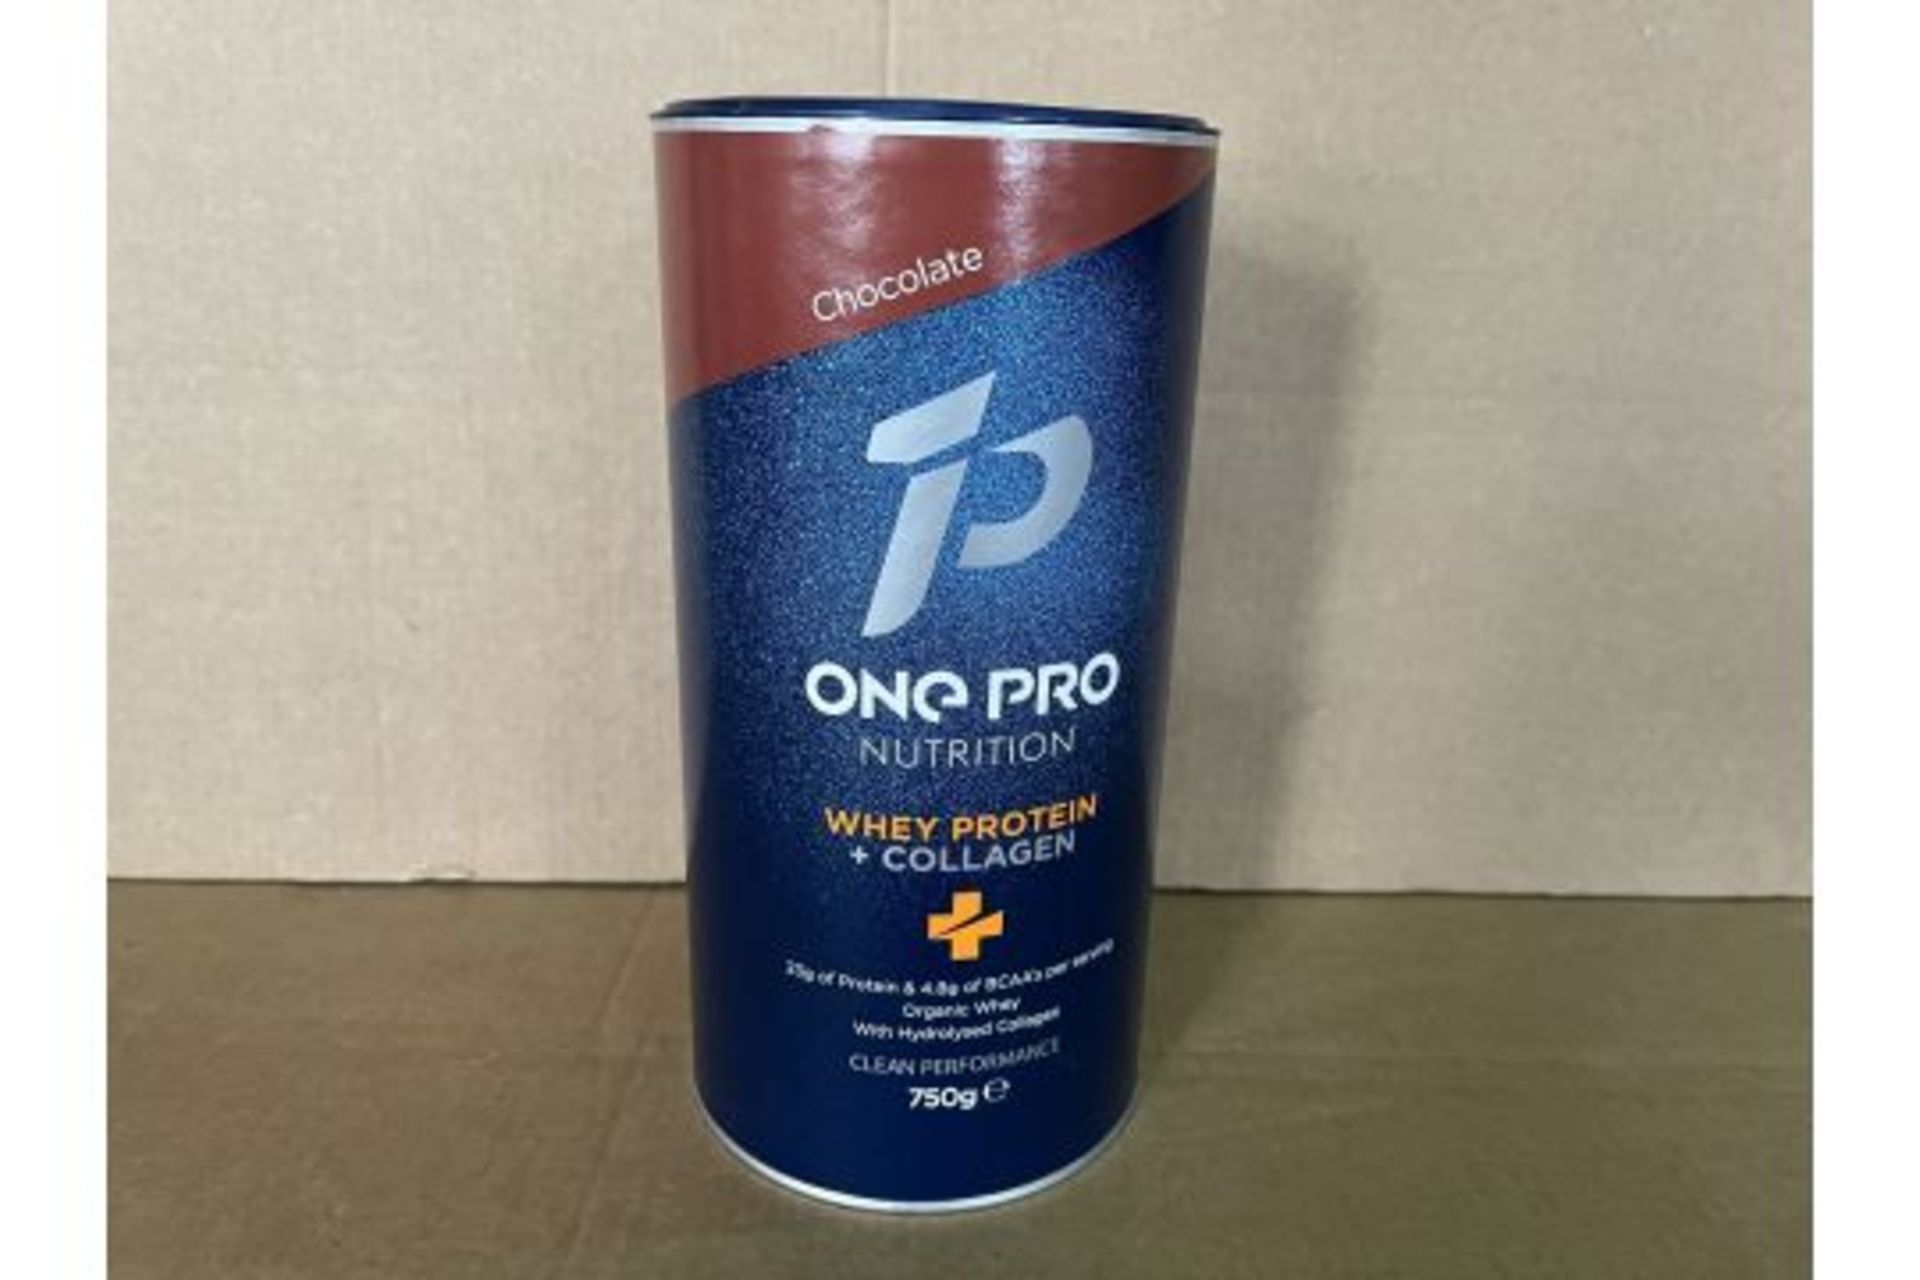 80 X 750G TUBS OF ONE PRO NUTRITION WHEY PROTEIN STRAWBERRY. BBE 03.22. S1-36